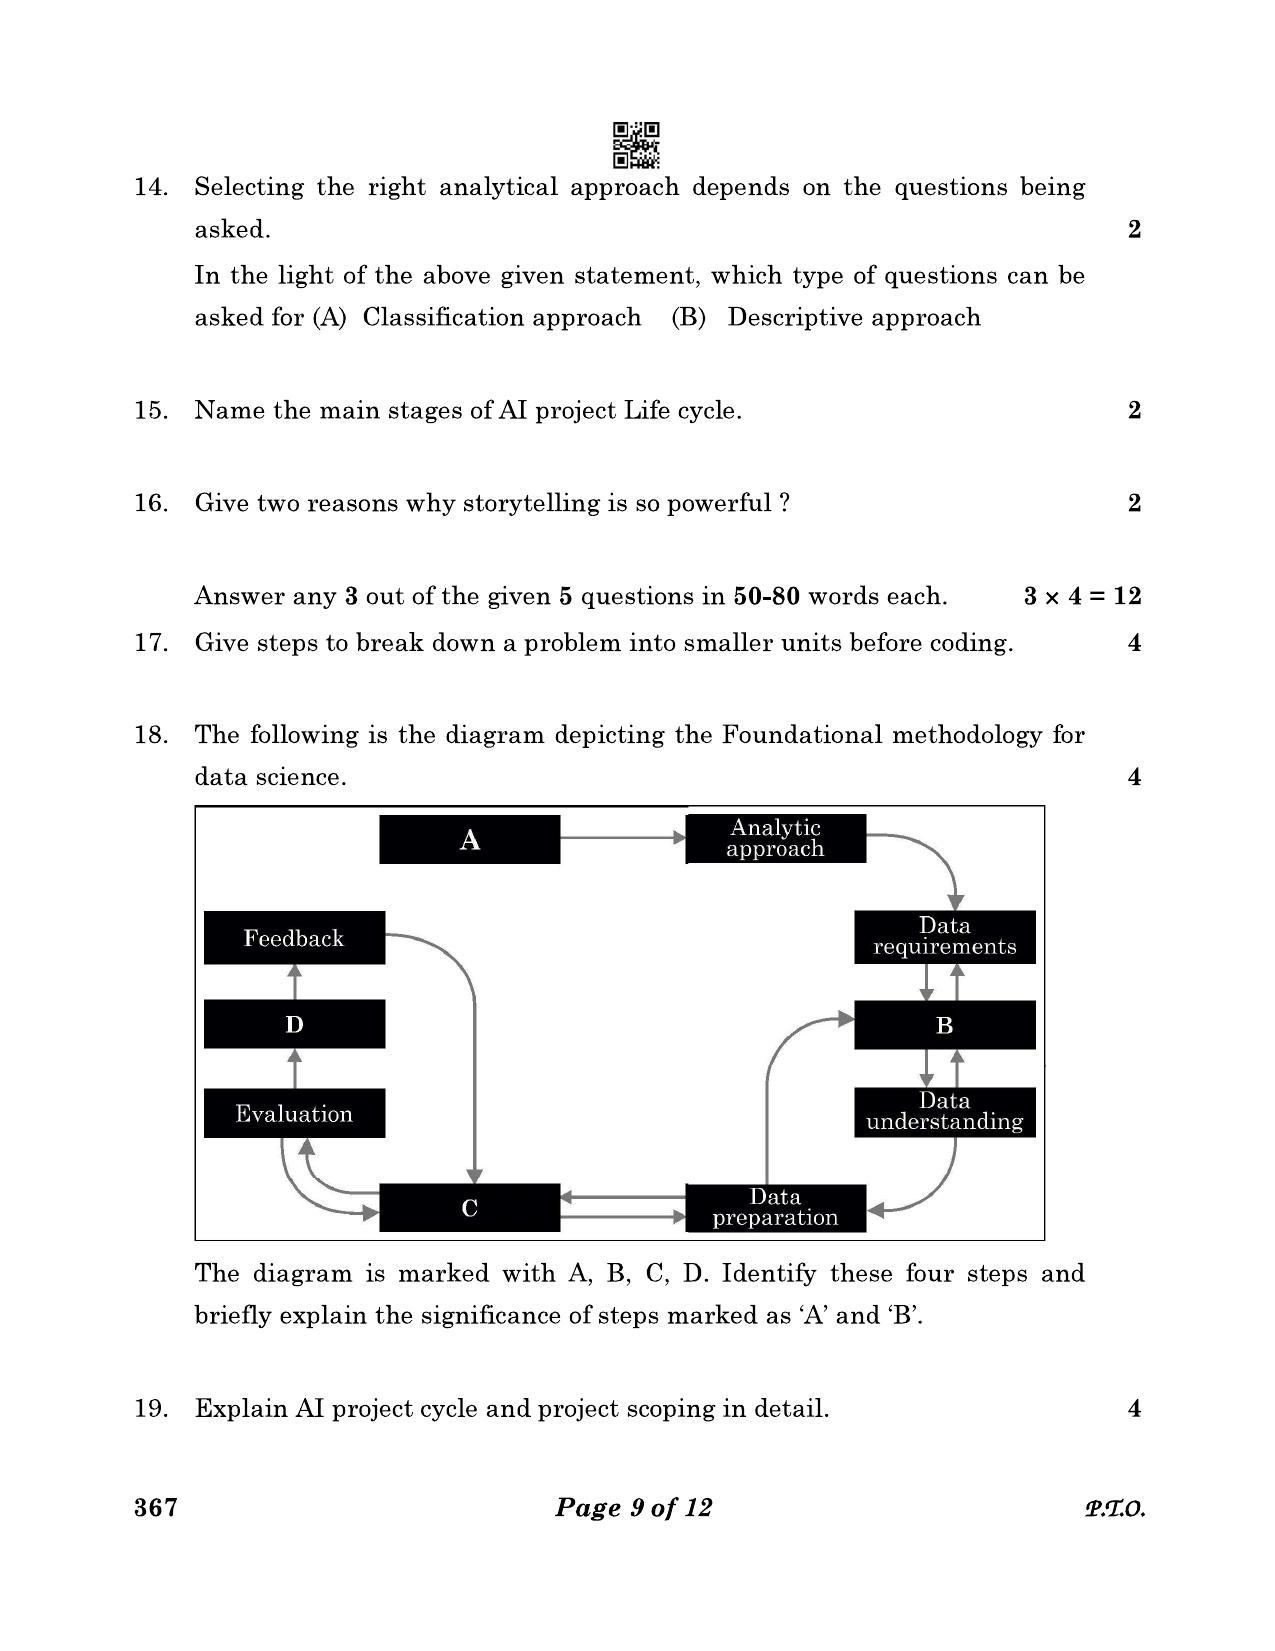 CBSE Class 12 367_Artificial Intelligence 2023 Question Paper - Page 9